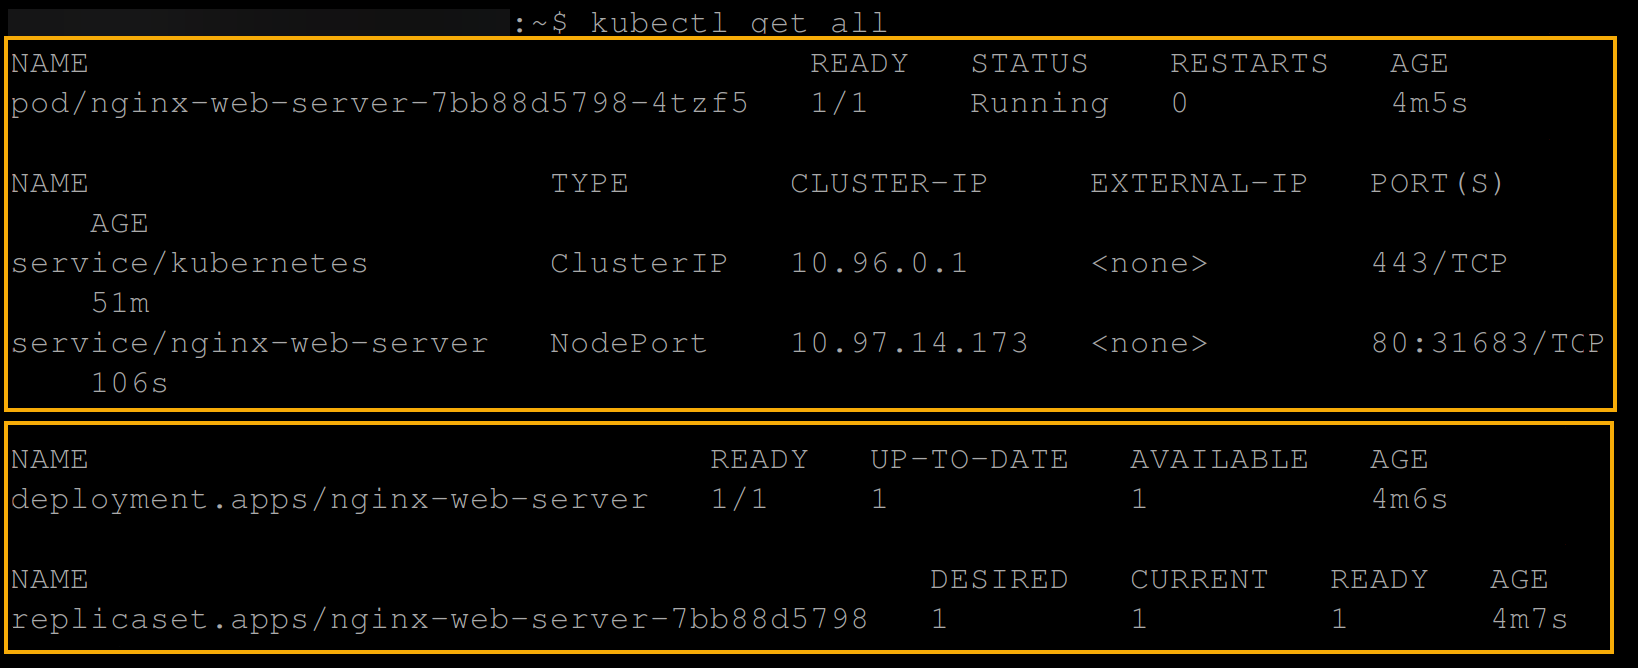 Getting all resources in Kubernetes cluster